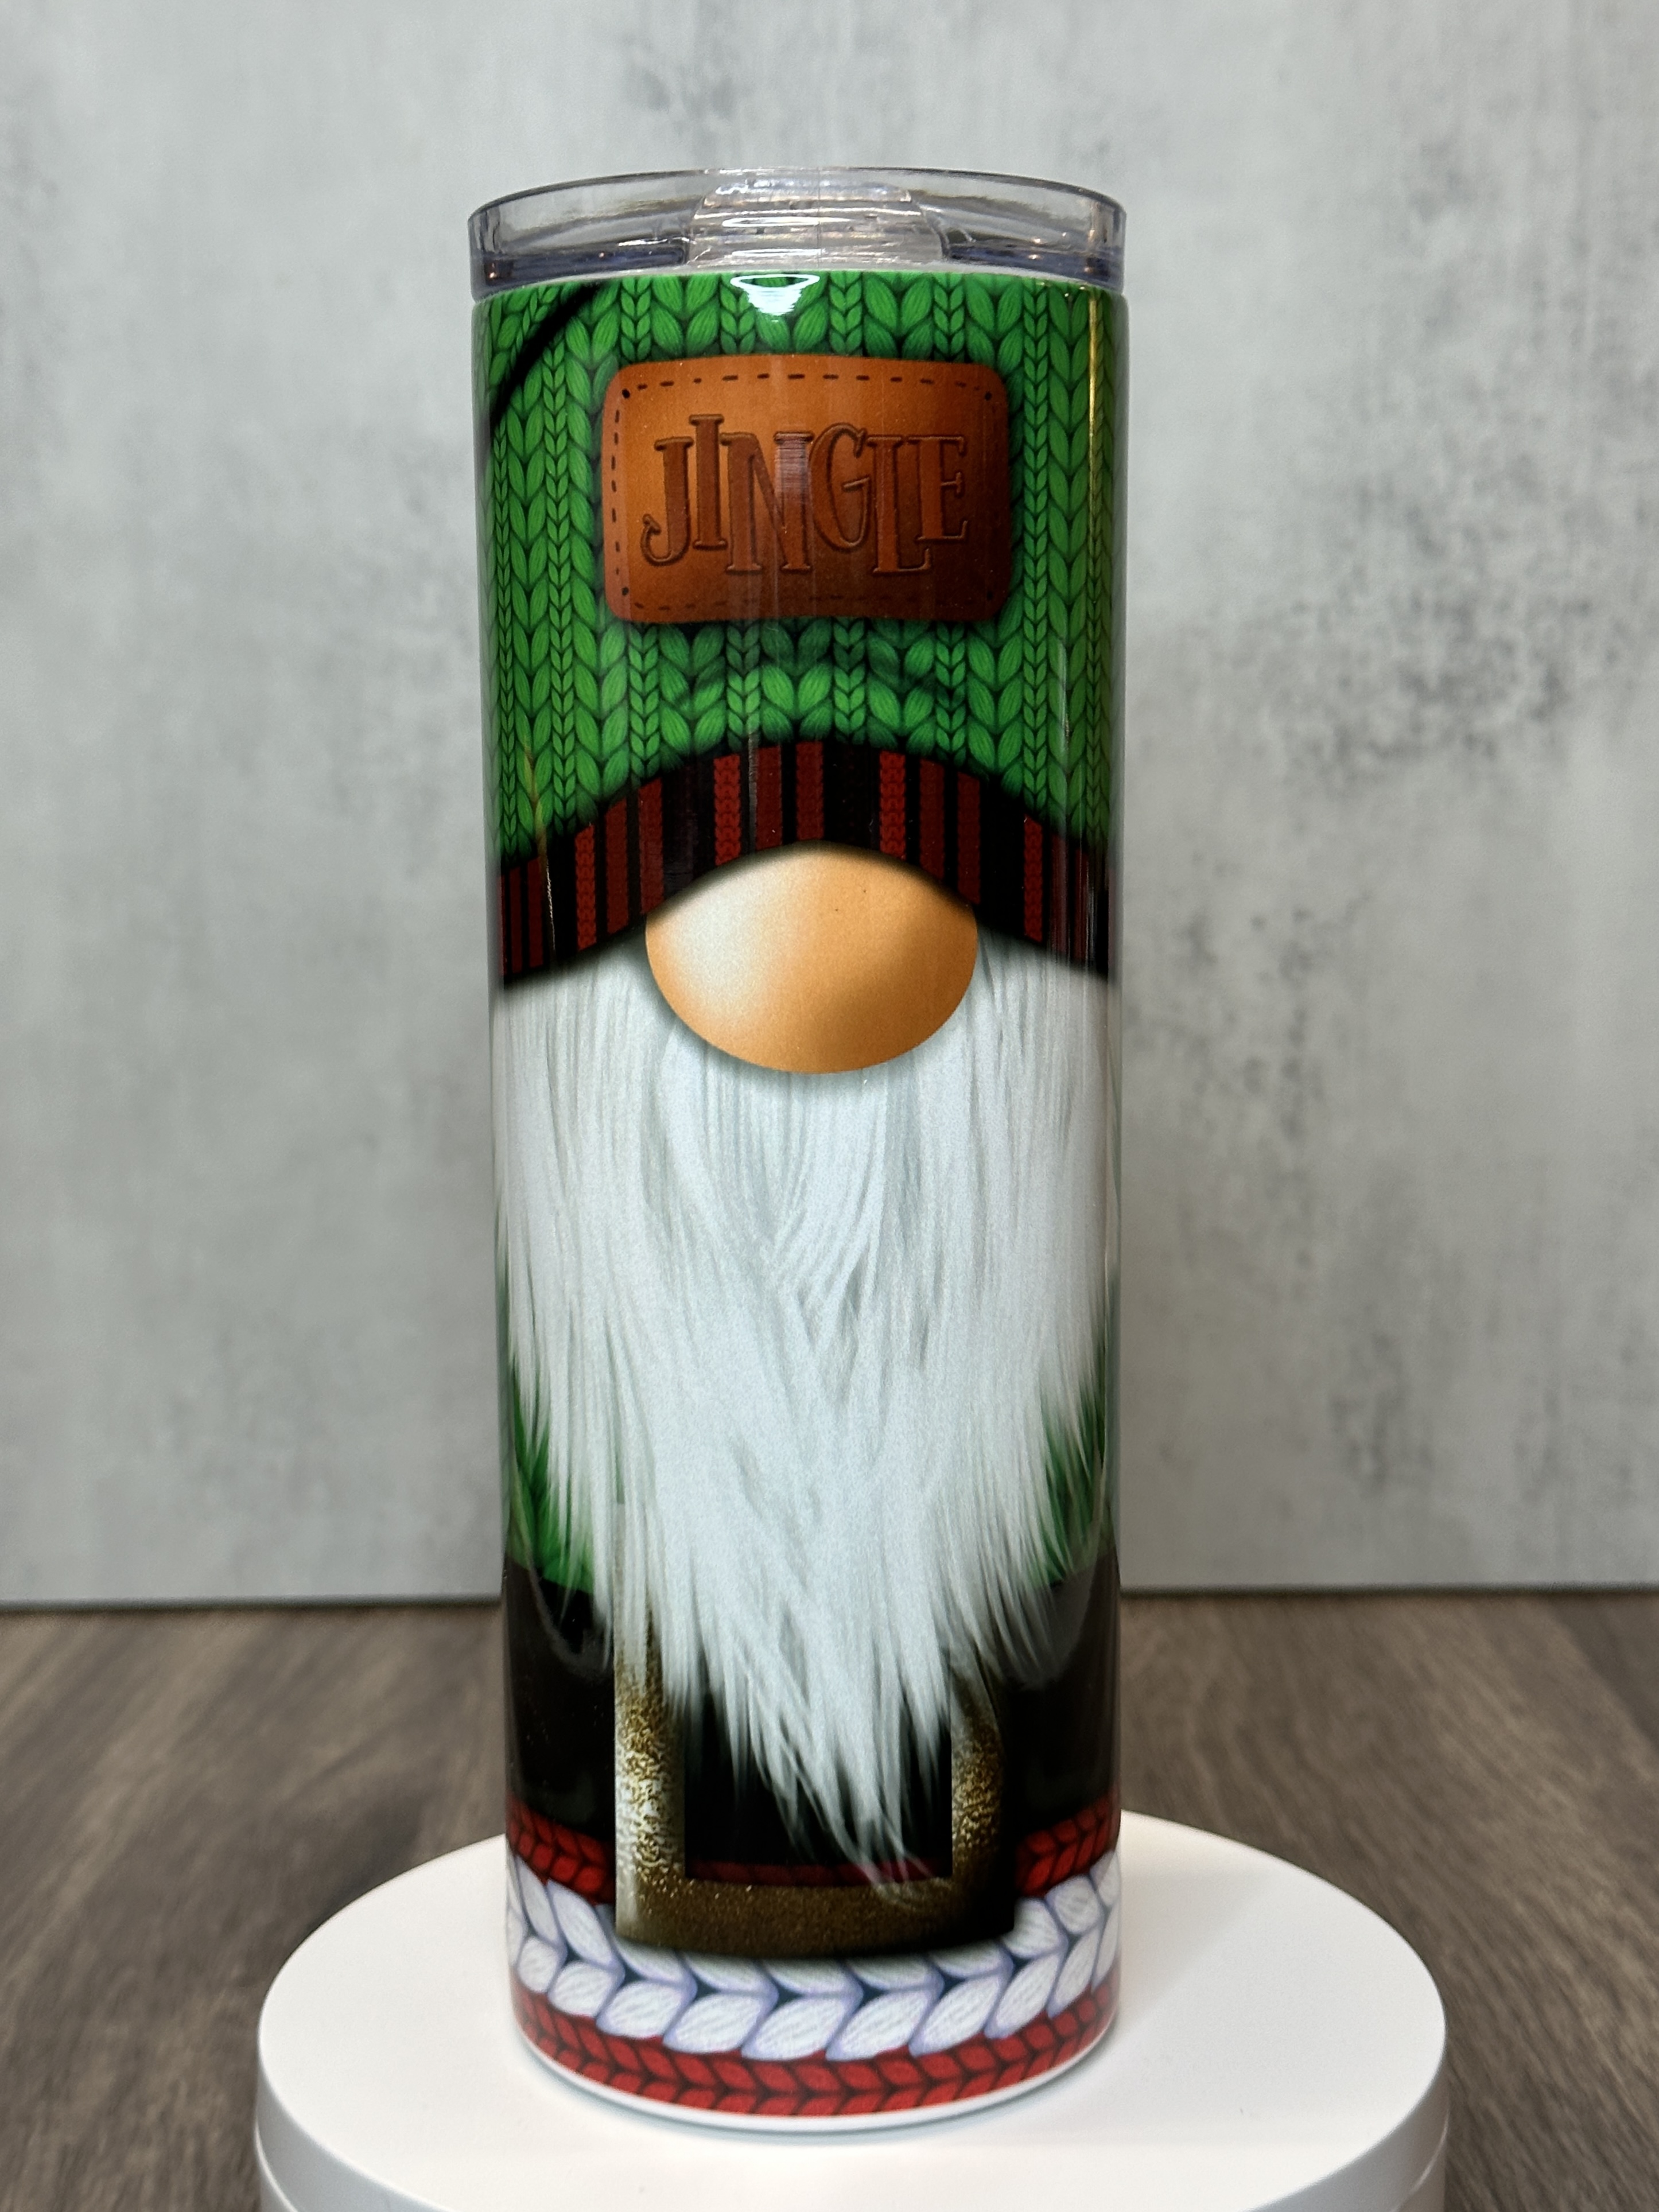 The 20 oz. gnome holiday tumbler is great during the festive holiday season!  Holds both cold o